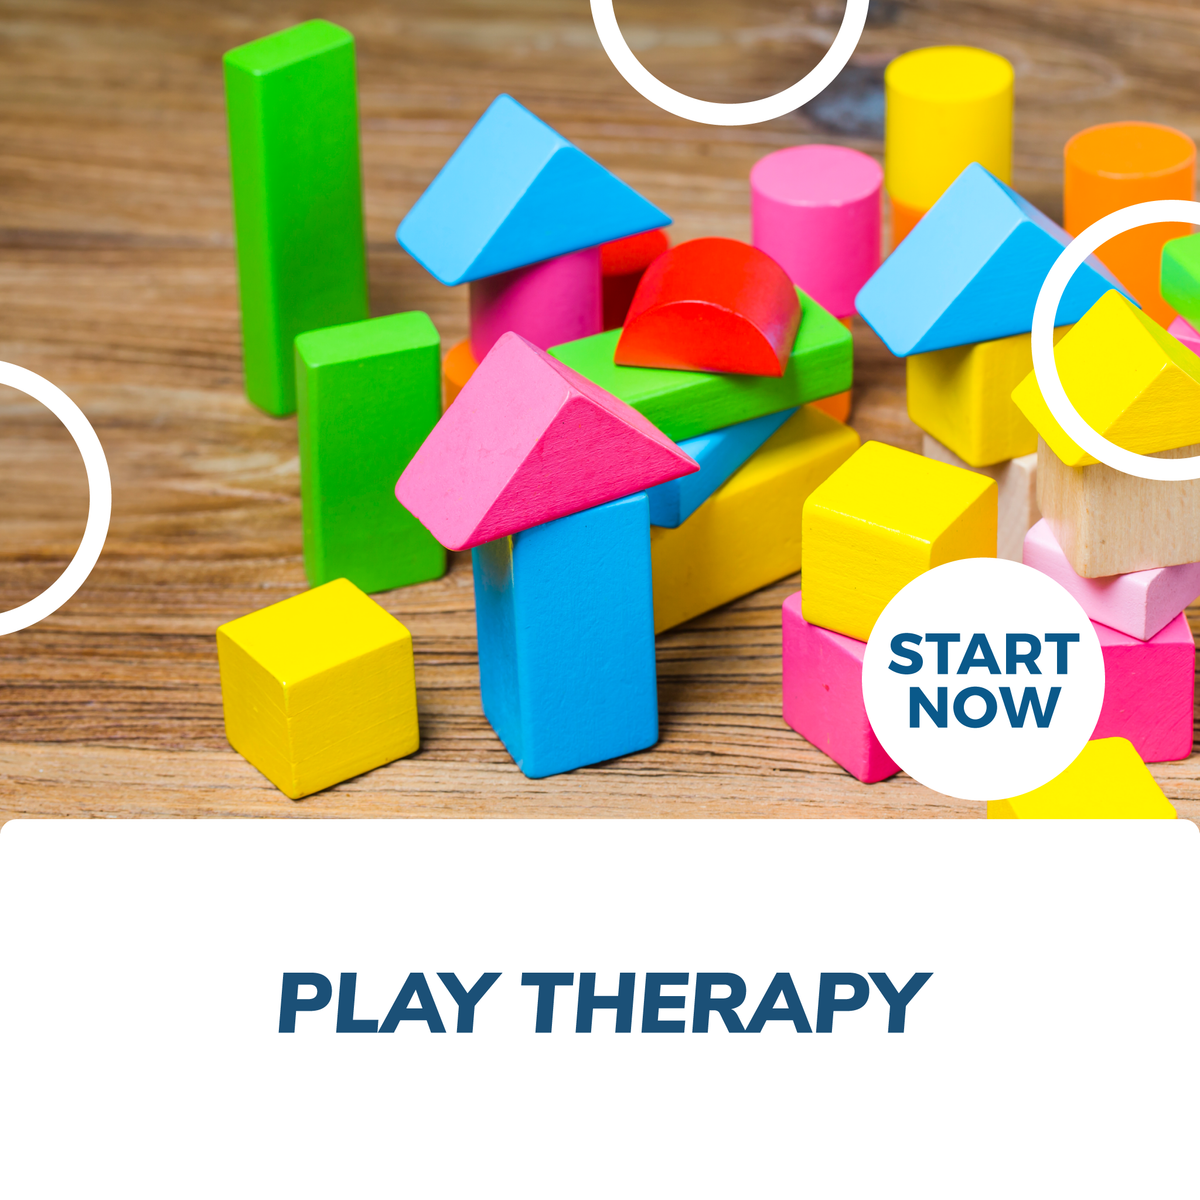 All Products - Let's Play Therapy Institute